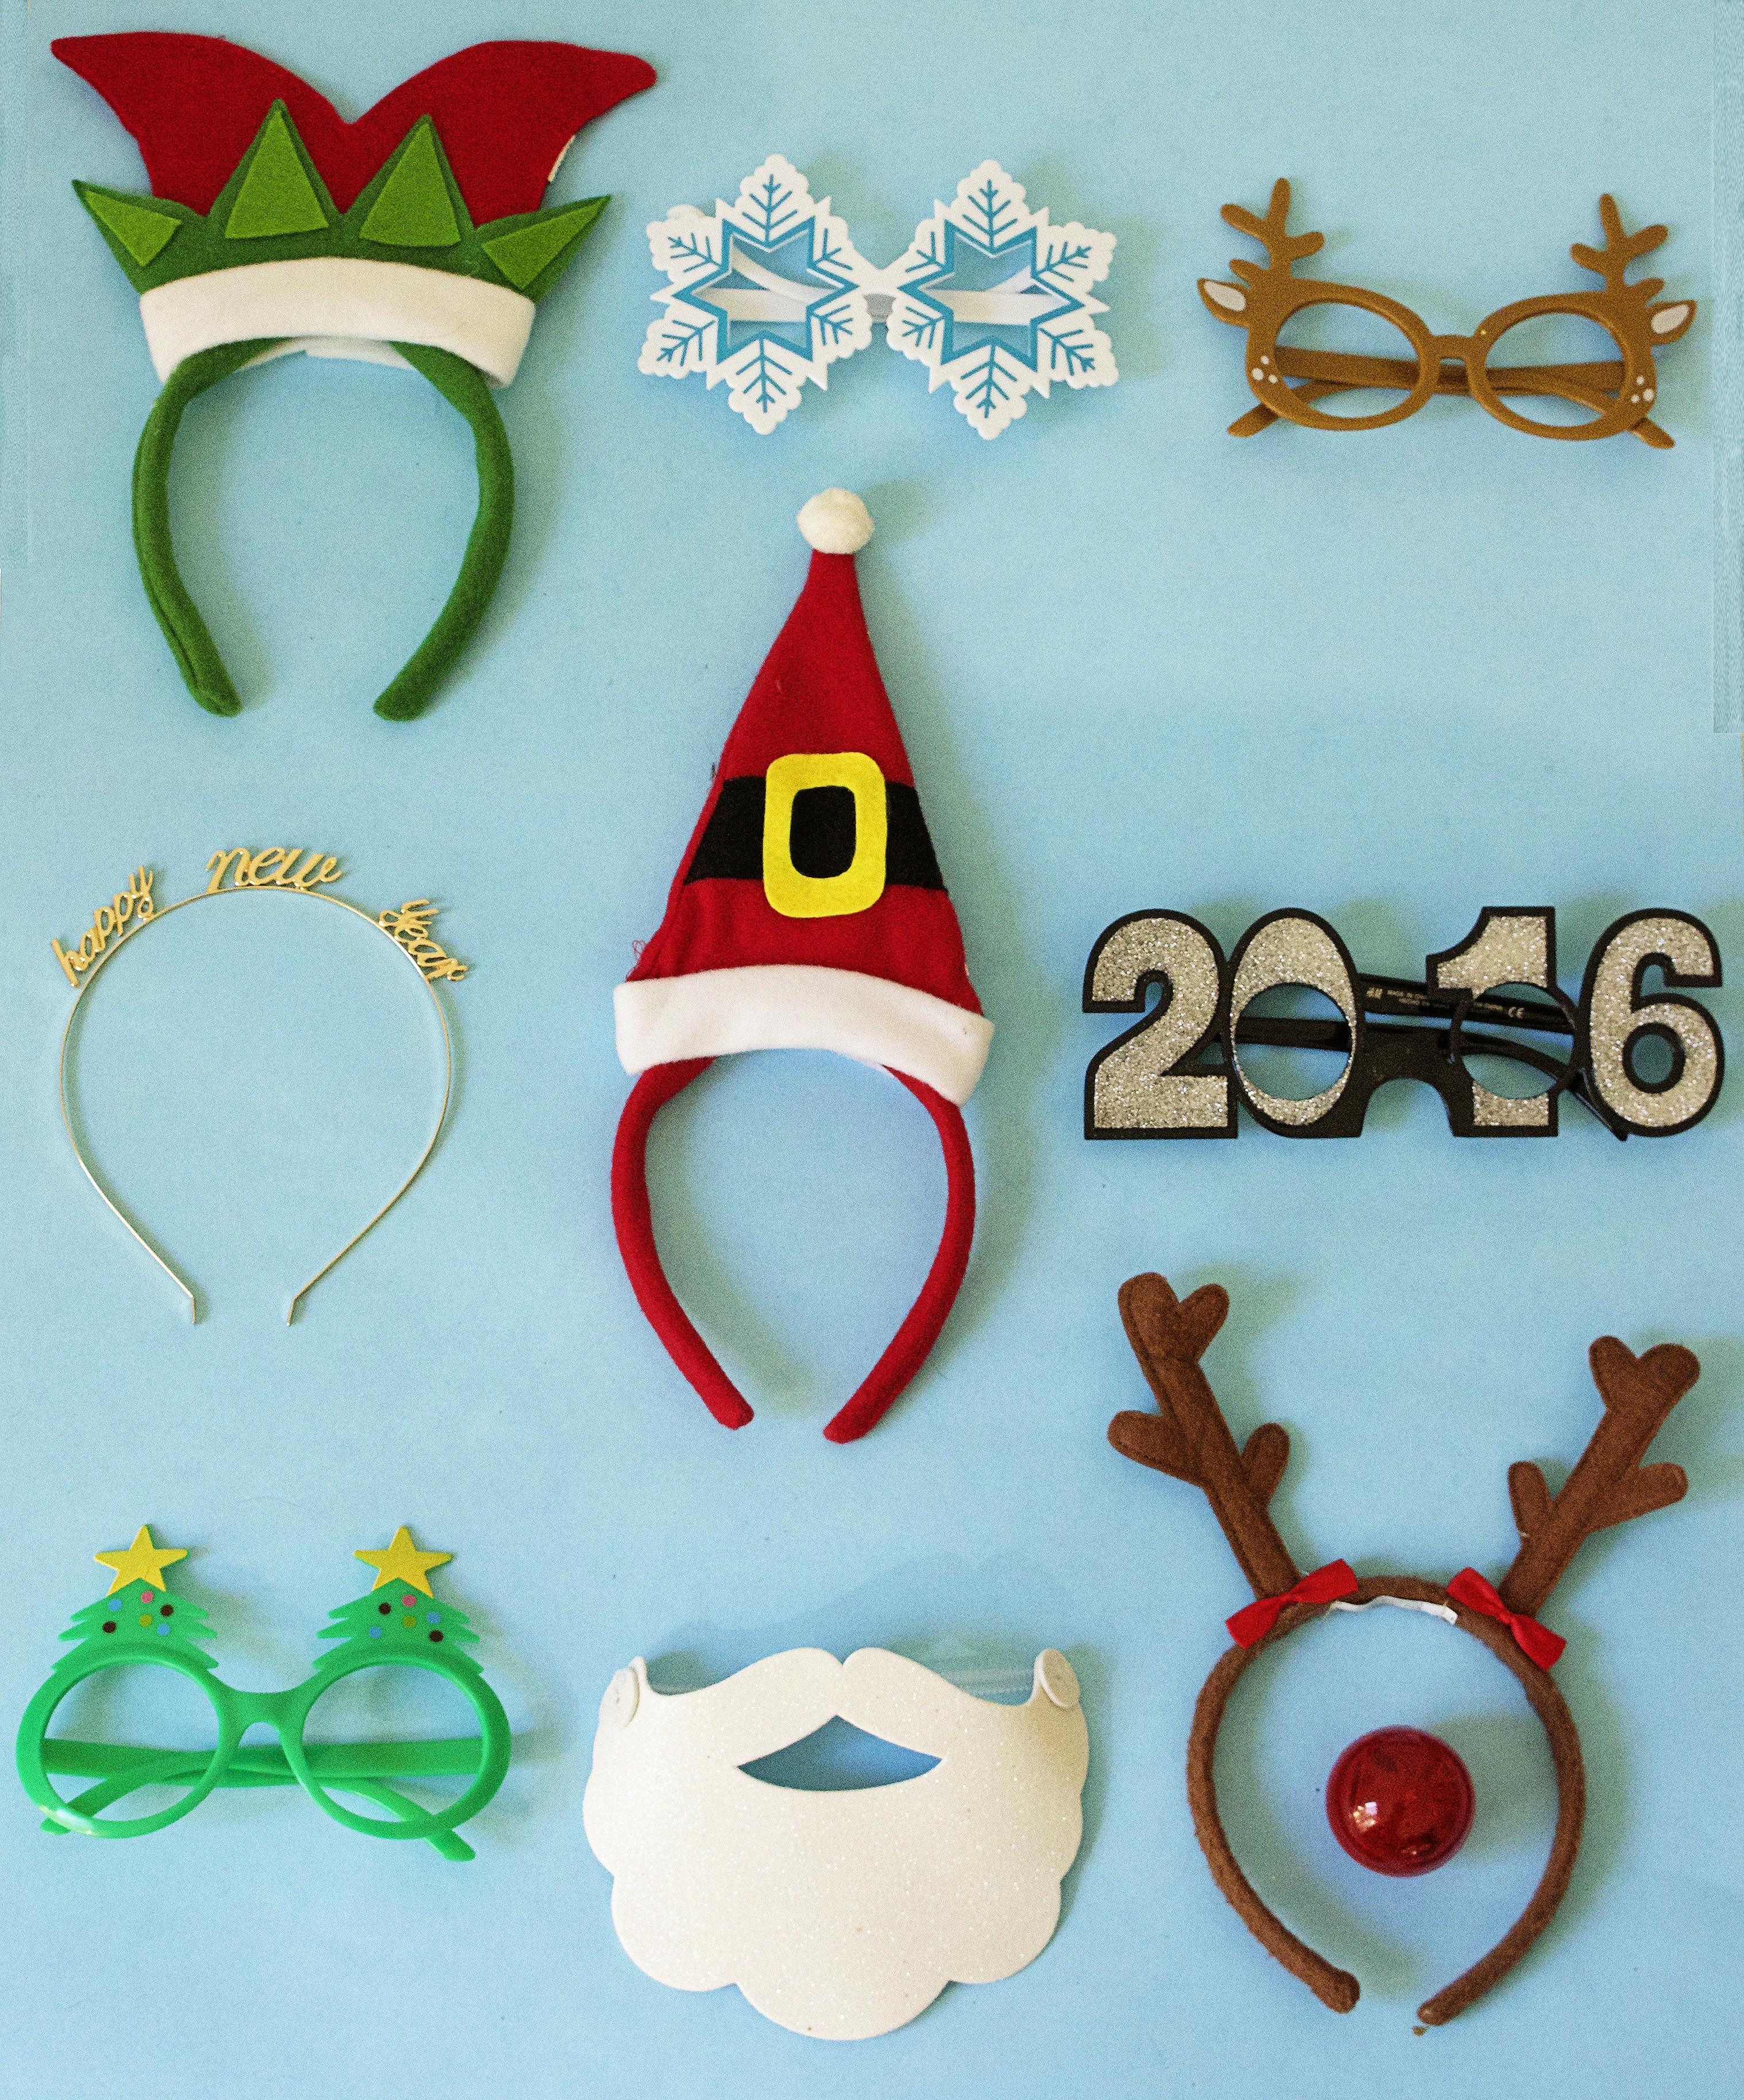 easy fun with kids - wear holiday headbands and glasses - Fabulistasfinal